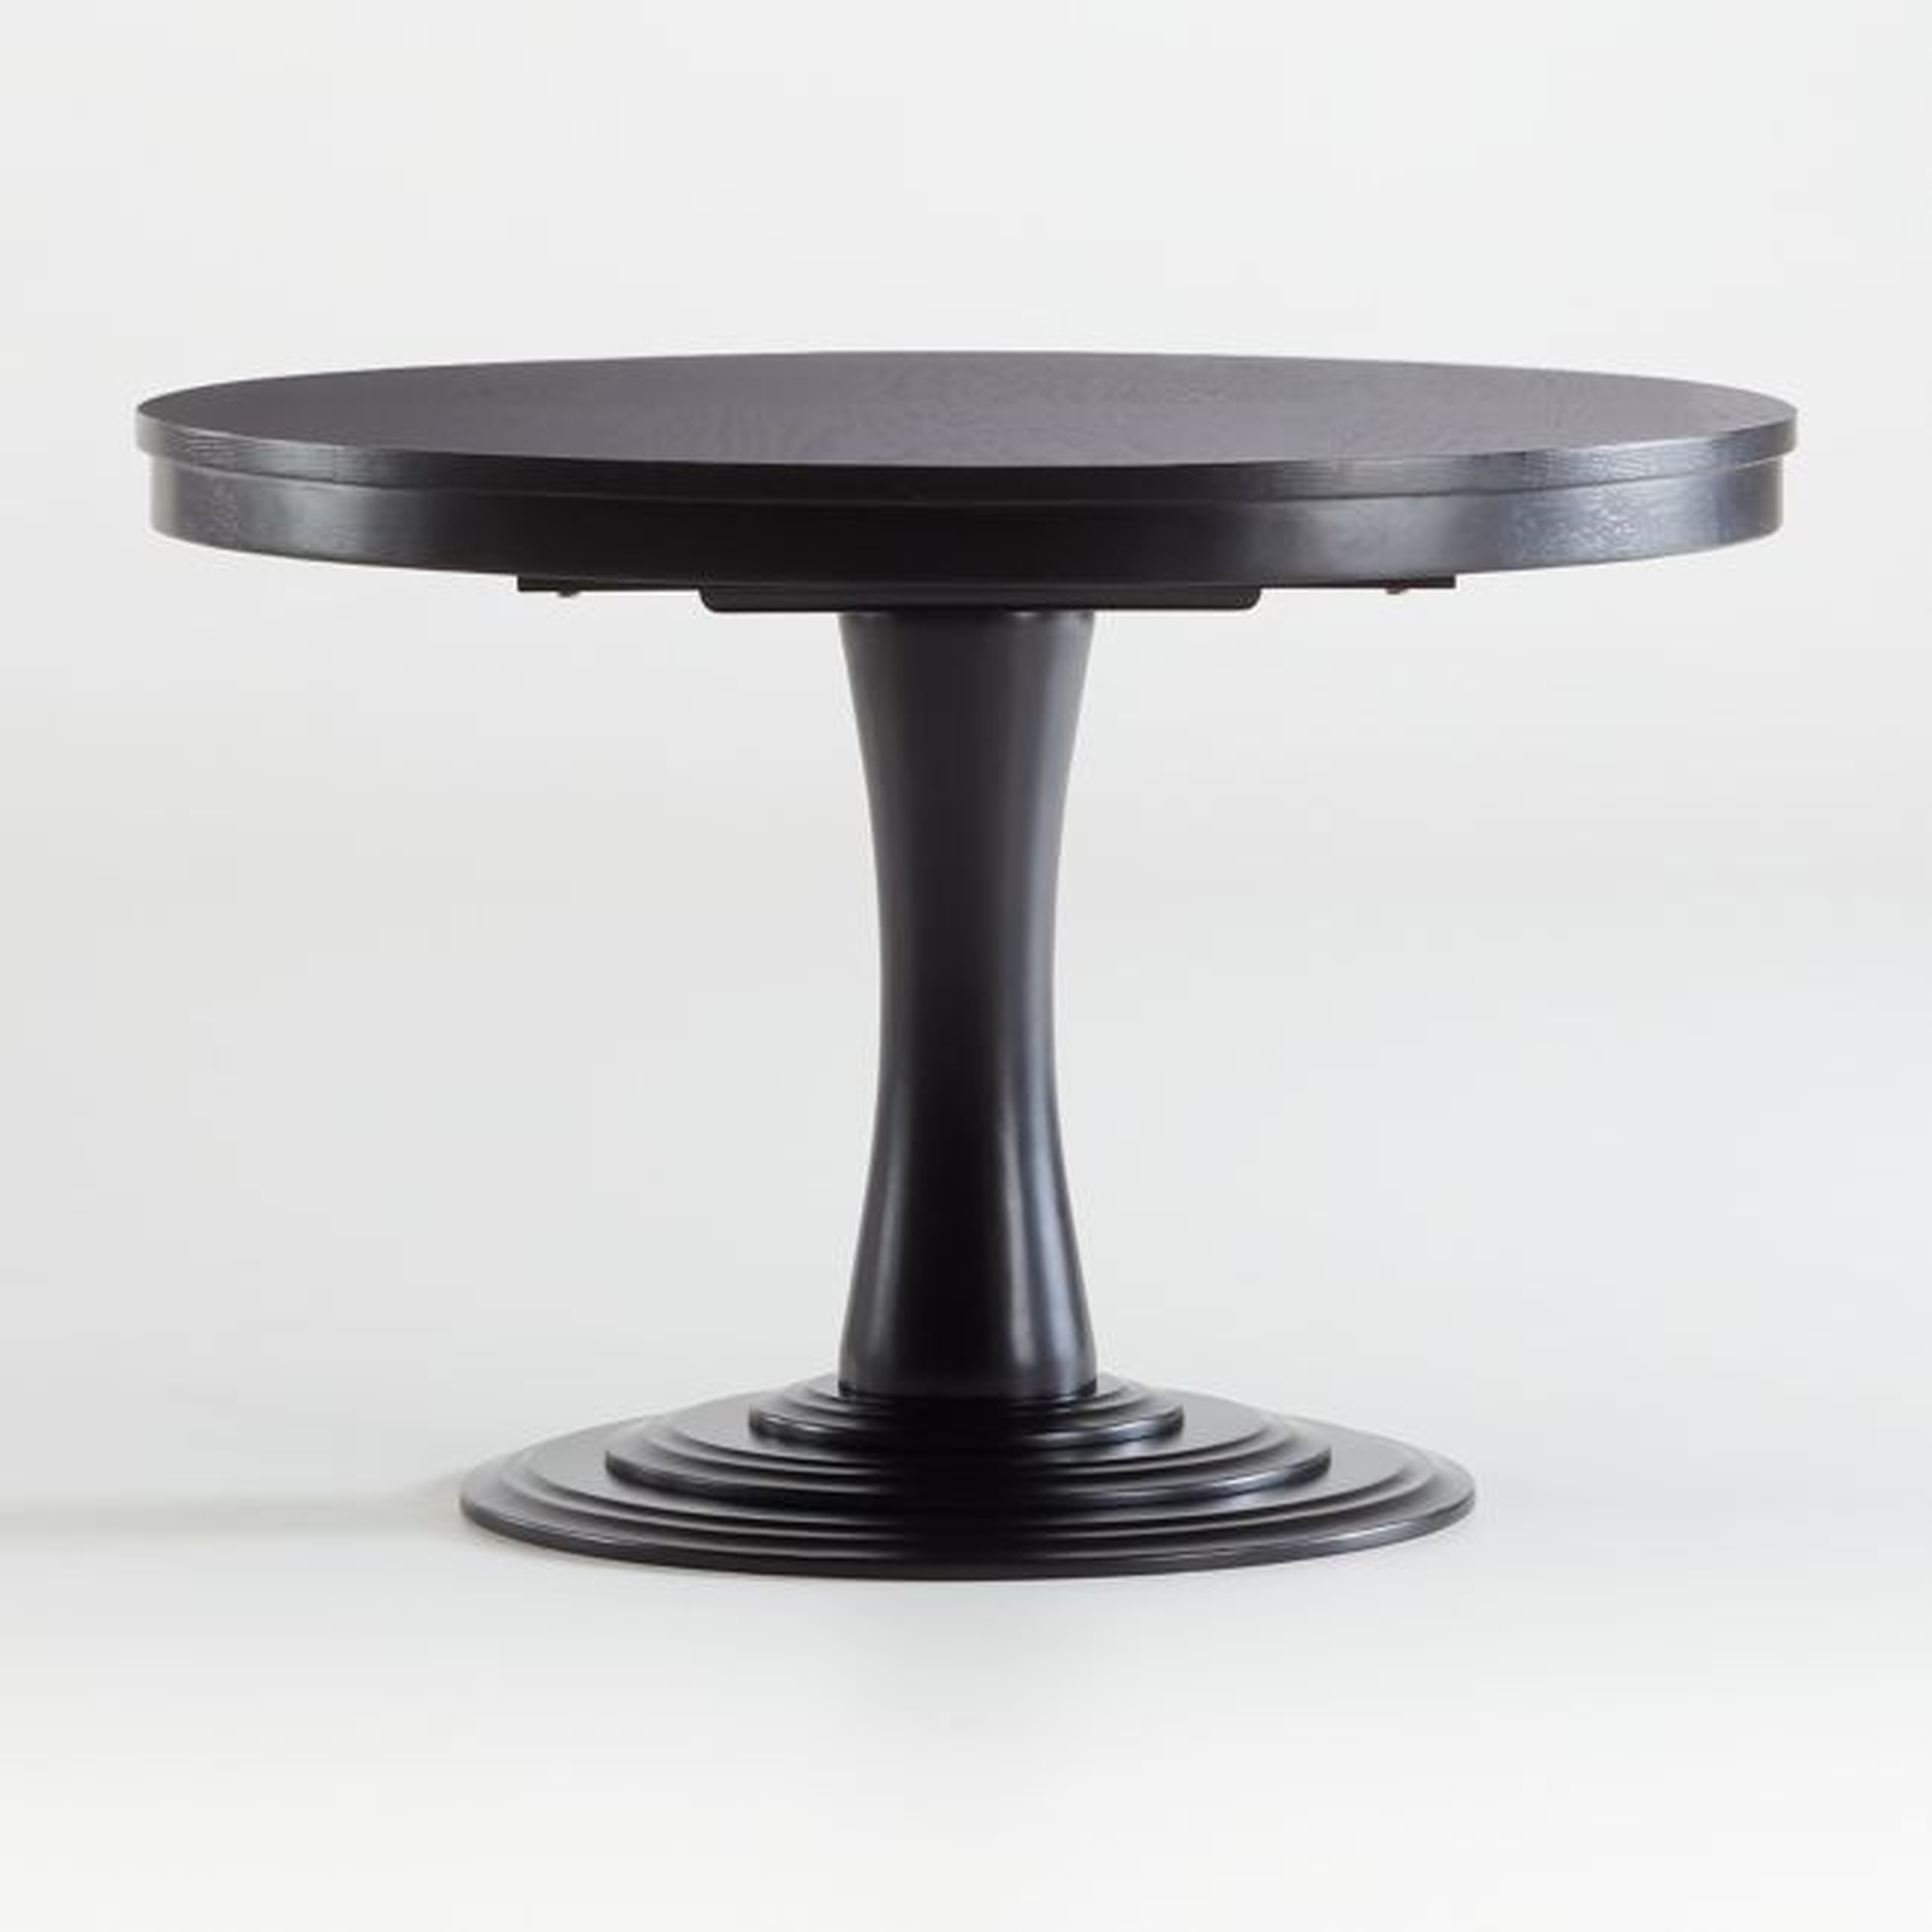 Aniston Black 45" Round Extension Dining Table - Crate and Barrel